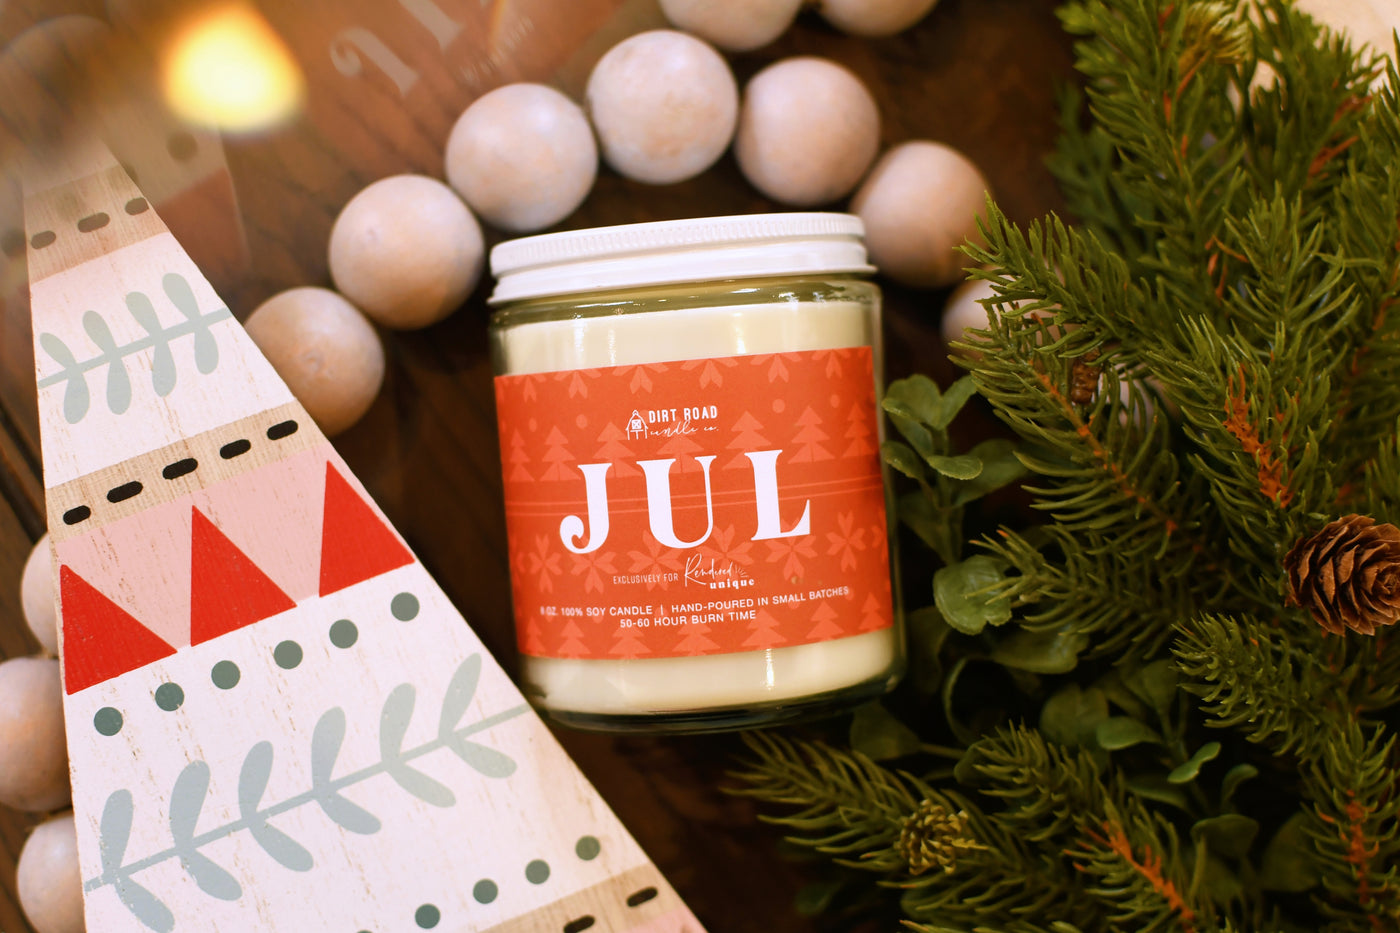 JUL Custom Candle by Dirt Road Candle Co